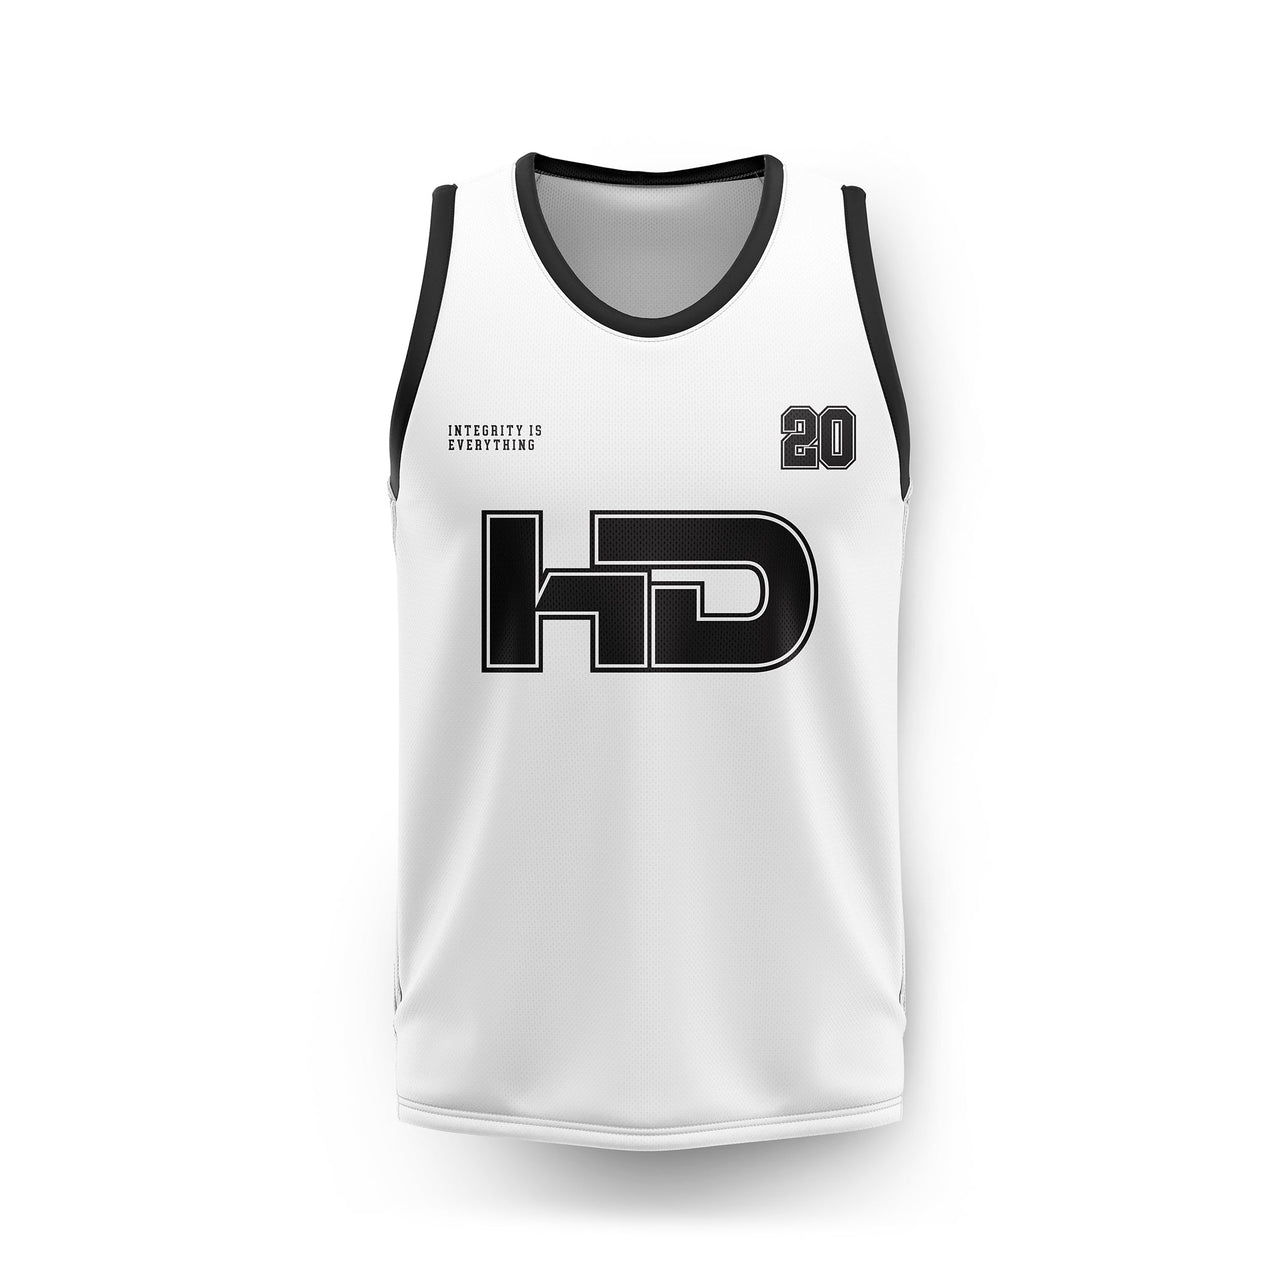 Archive Jersey - HD MUSCLE